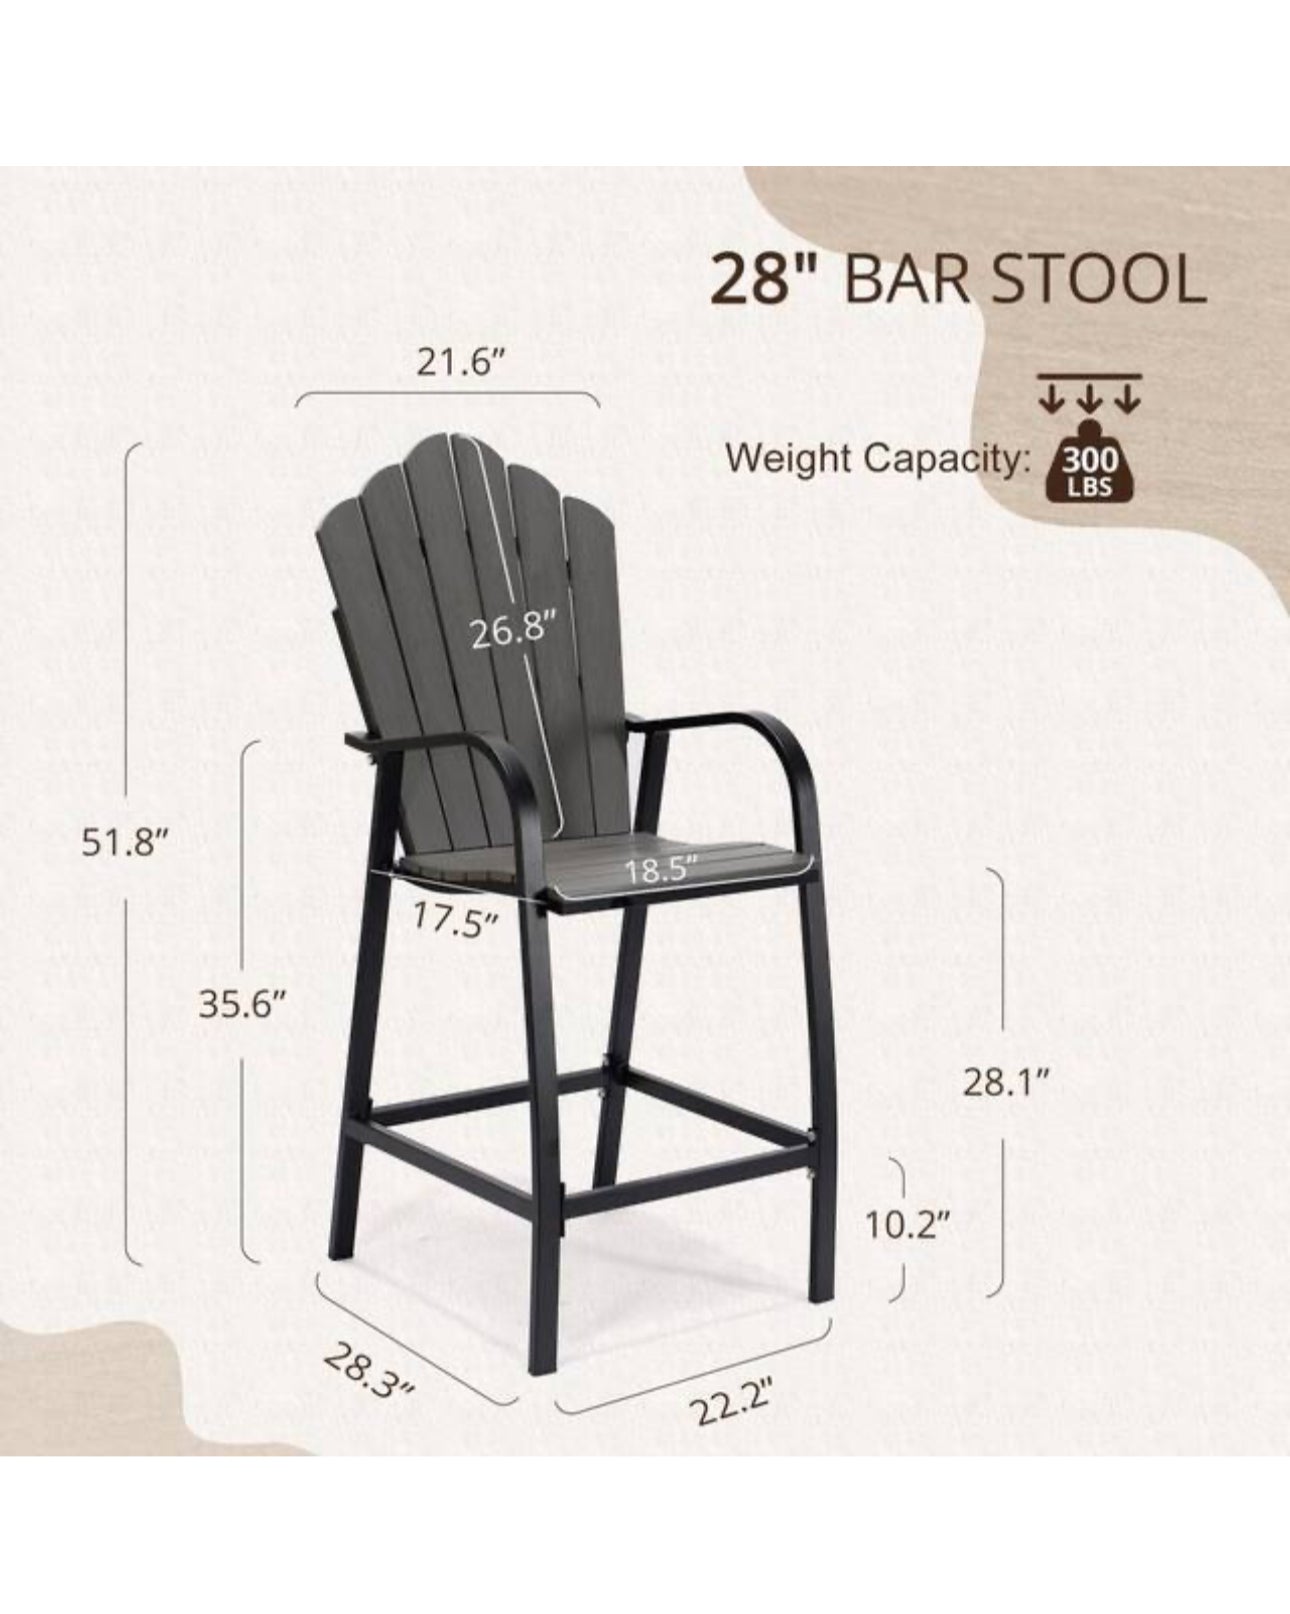 Balcony Tall Adirondack Chair with Aluminum Frame, Poly Bar Height Adirondack Chairs, Weather Resistant High Chairs for Deck, Porch, Black